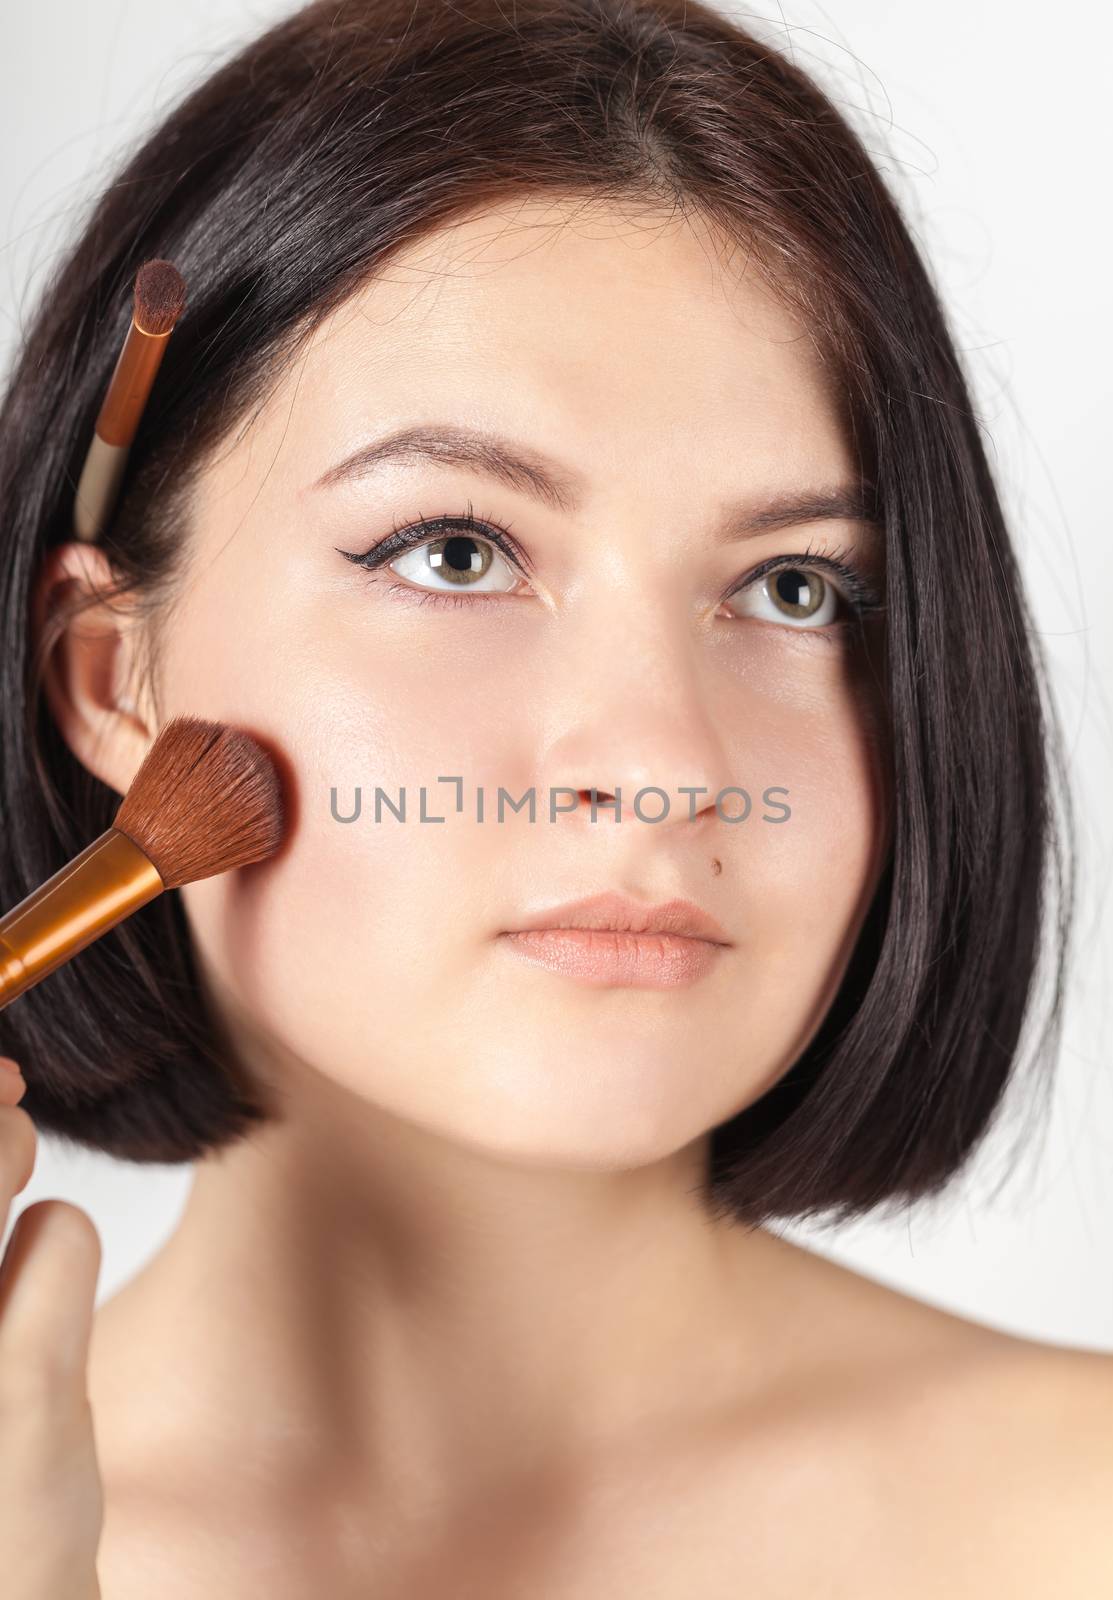 the girl does make-up on a white background